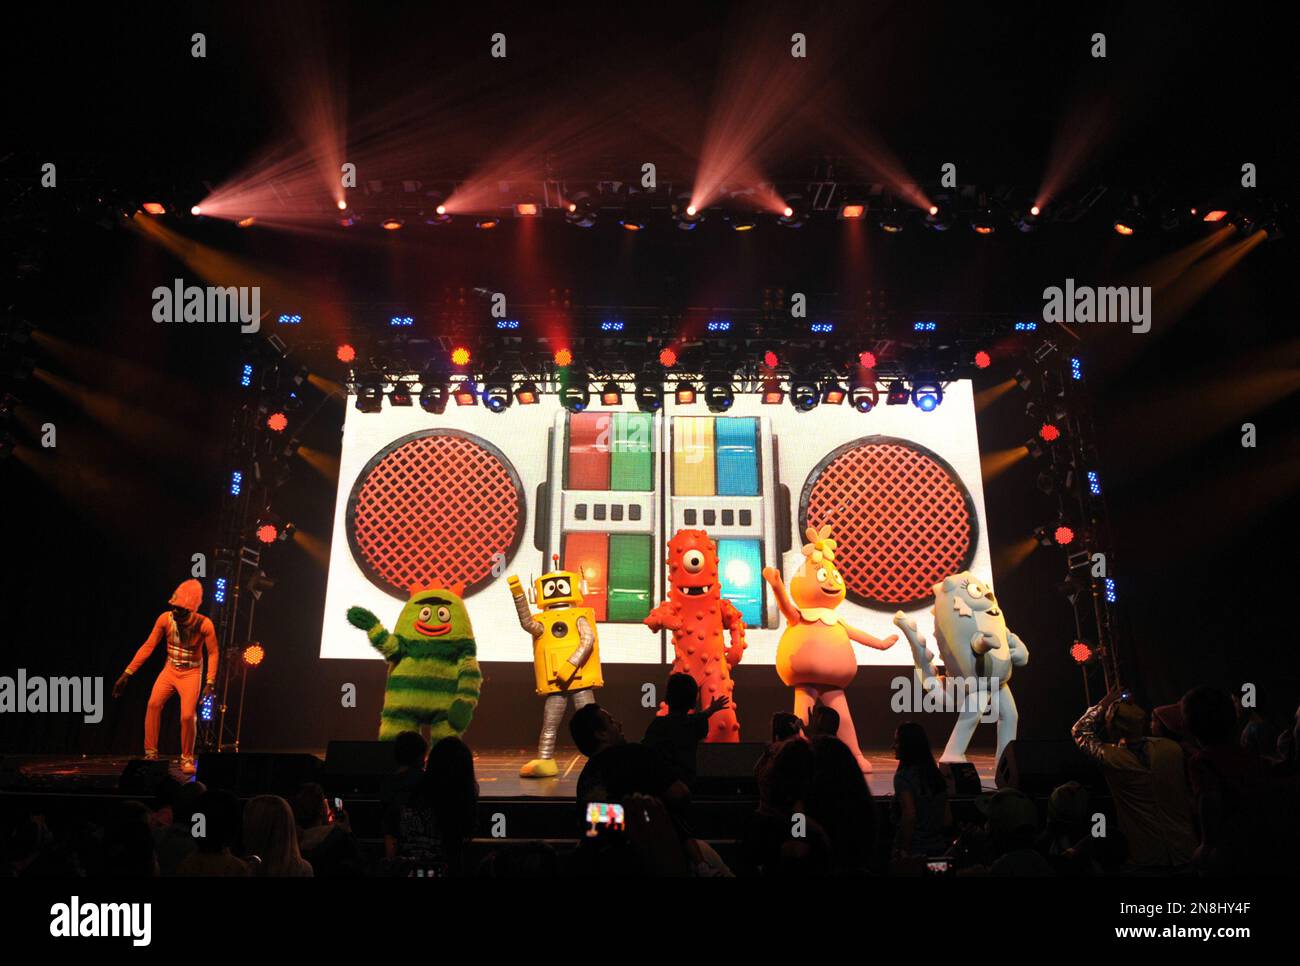 https://c8.alamy.com/comp/2N8HY4F/from-left-dj-lance-rock-brobee-plex-muno-foofa-and-toodee-perform-onstage-at-yo-gabba-gabba!-live!-get-the-sillies-out!-50-city-tour-kick-off-performance-on-thanksgiving-weekend-at-nokia-theatre-la-live-on-friday-nov-23-2012-in-los-angeles-photo-by-john-shearerinvision-for-gabbacadabra-llcap-images-2N8HY4F.jpg